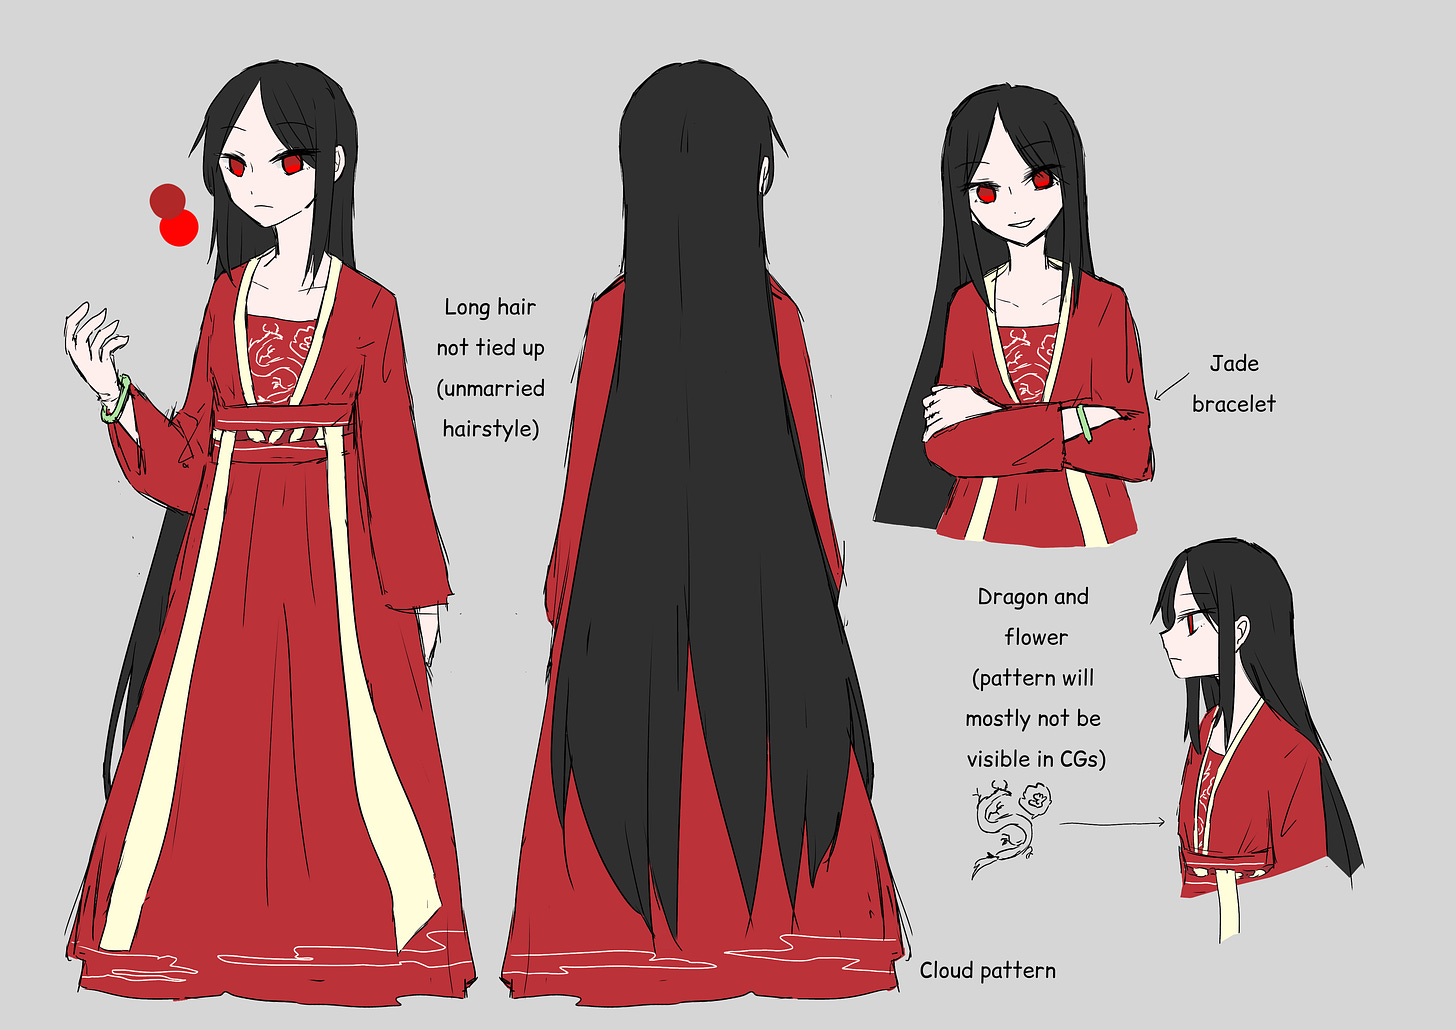 character sheet of a Chinese girl with long black hair, red eyes, red hanfu